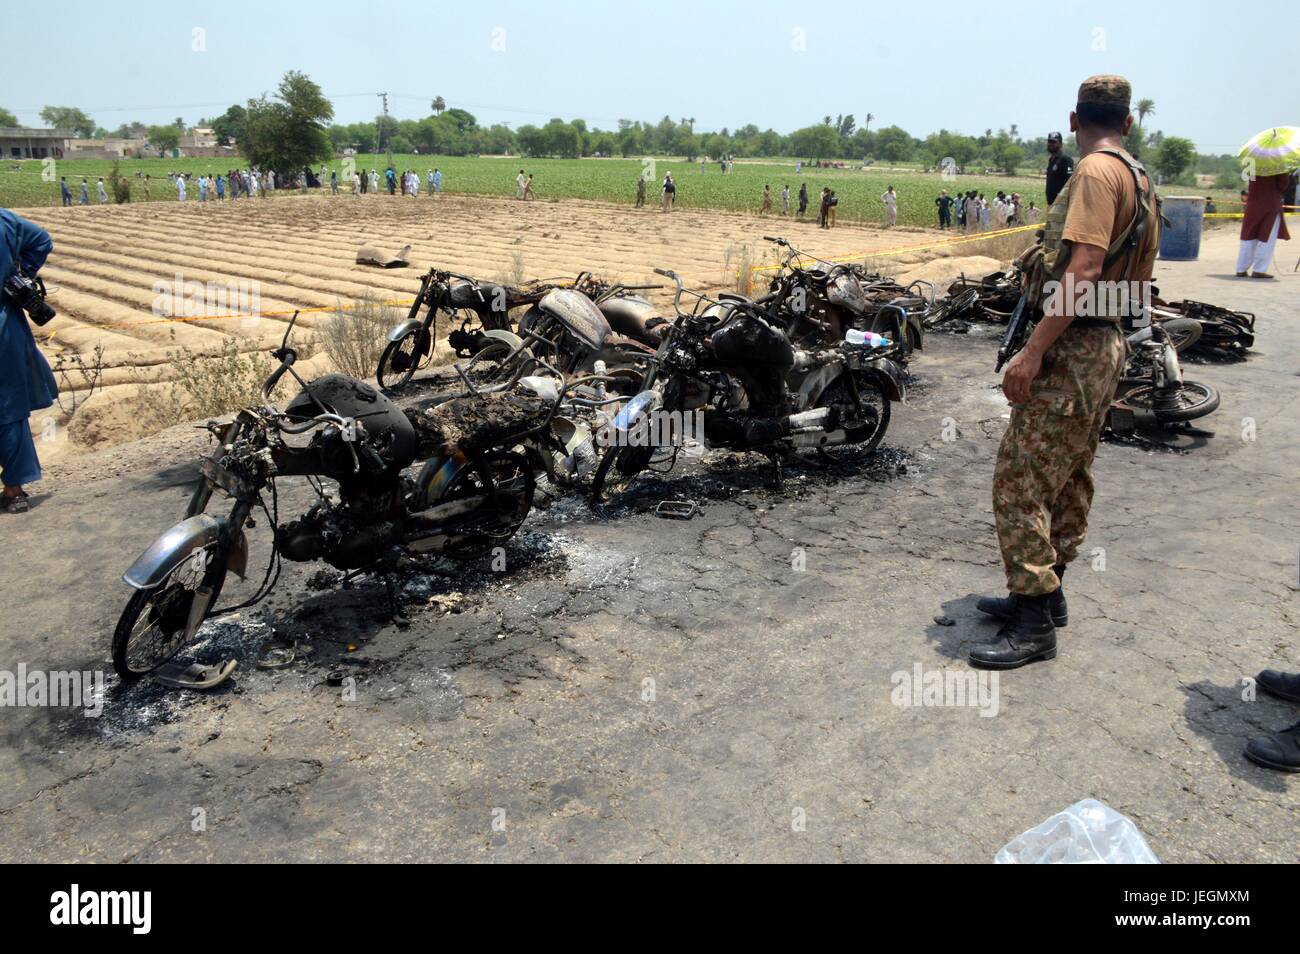 Bahawalpur. 25th June, 2017. A Pakistani soldier stands guard at the oil tanker accident site in eastern Pakistan's Bawahalpur, on June 25, 2017. At least 140 people were killed and over 120 others injured in an oil tanker fire that happened in the Pakistan's eastern Punjab province on Sunday morning, said a local parliamentarian. Credit: Stringer/Xinhua/Alamy Live News Stock Photo